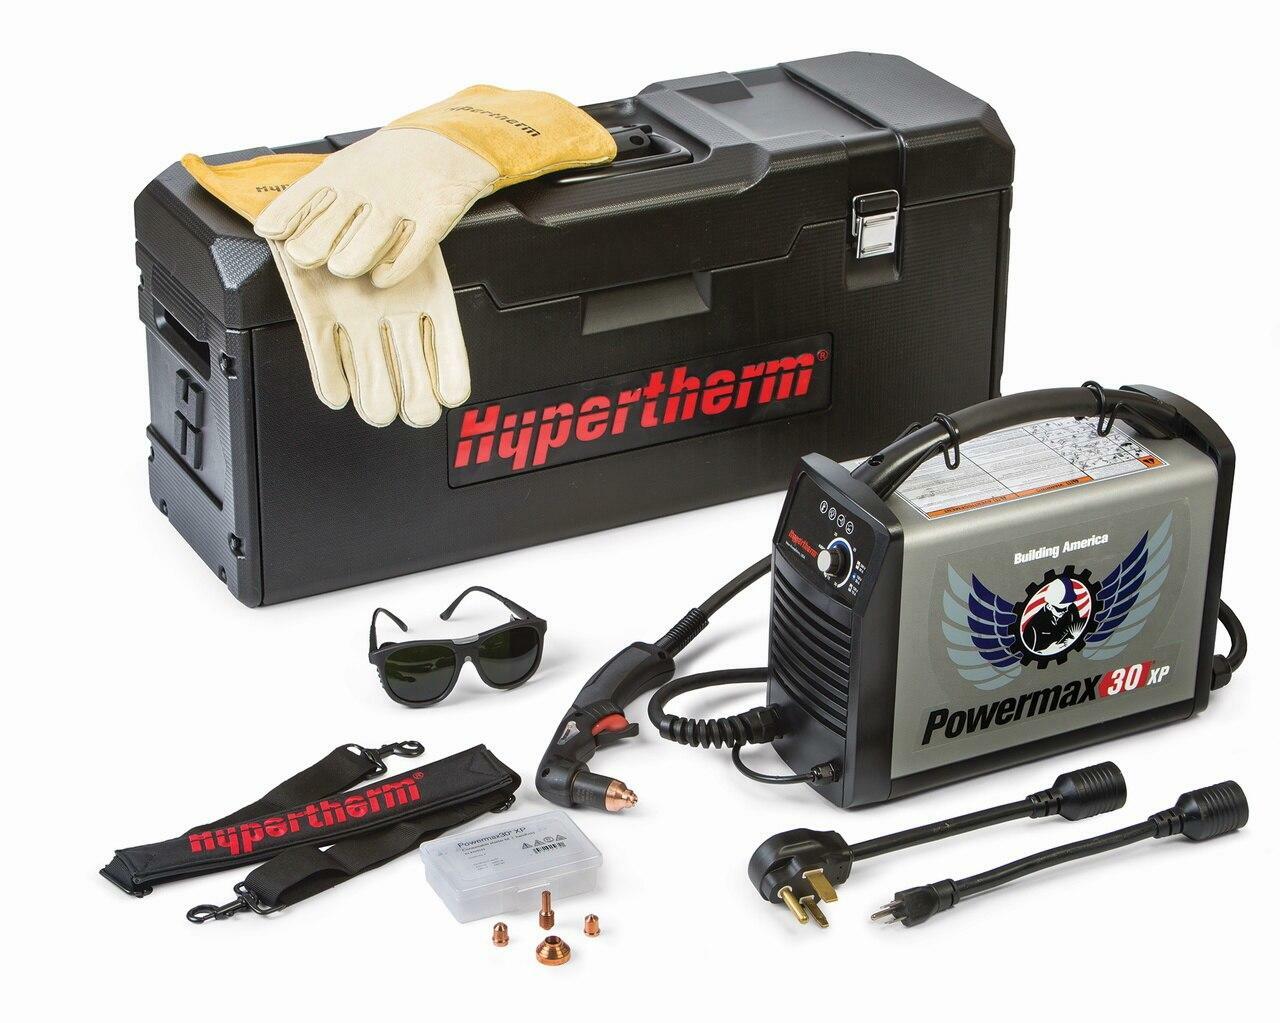 Powermax30 plasma cutter and consumables | Hypertherm